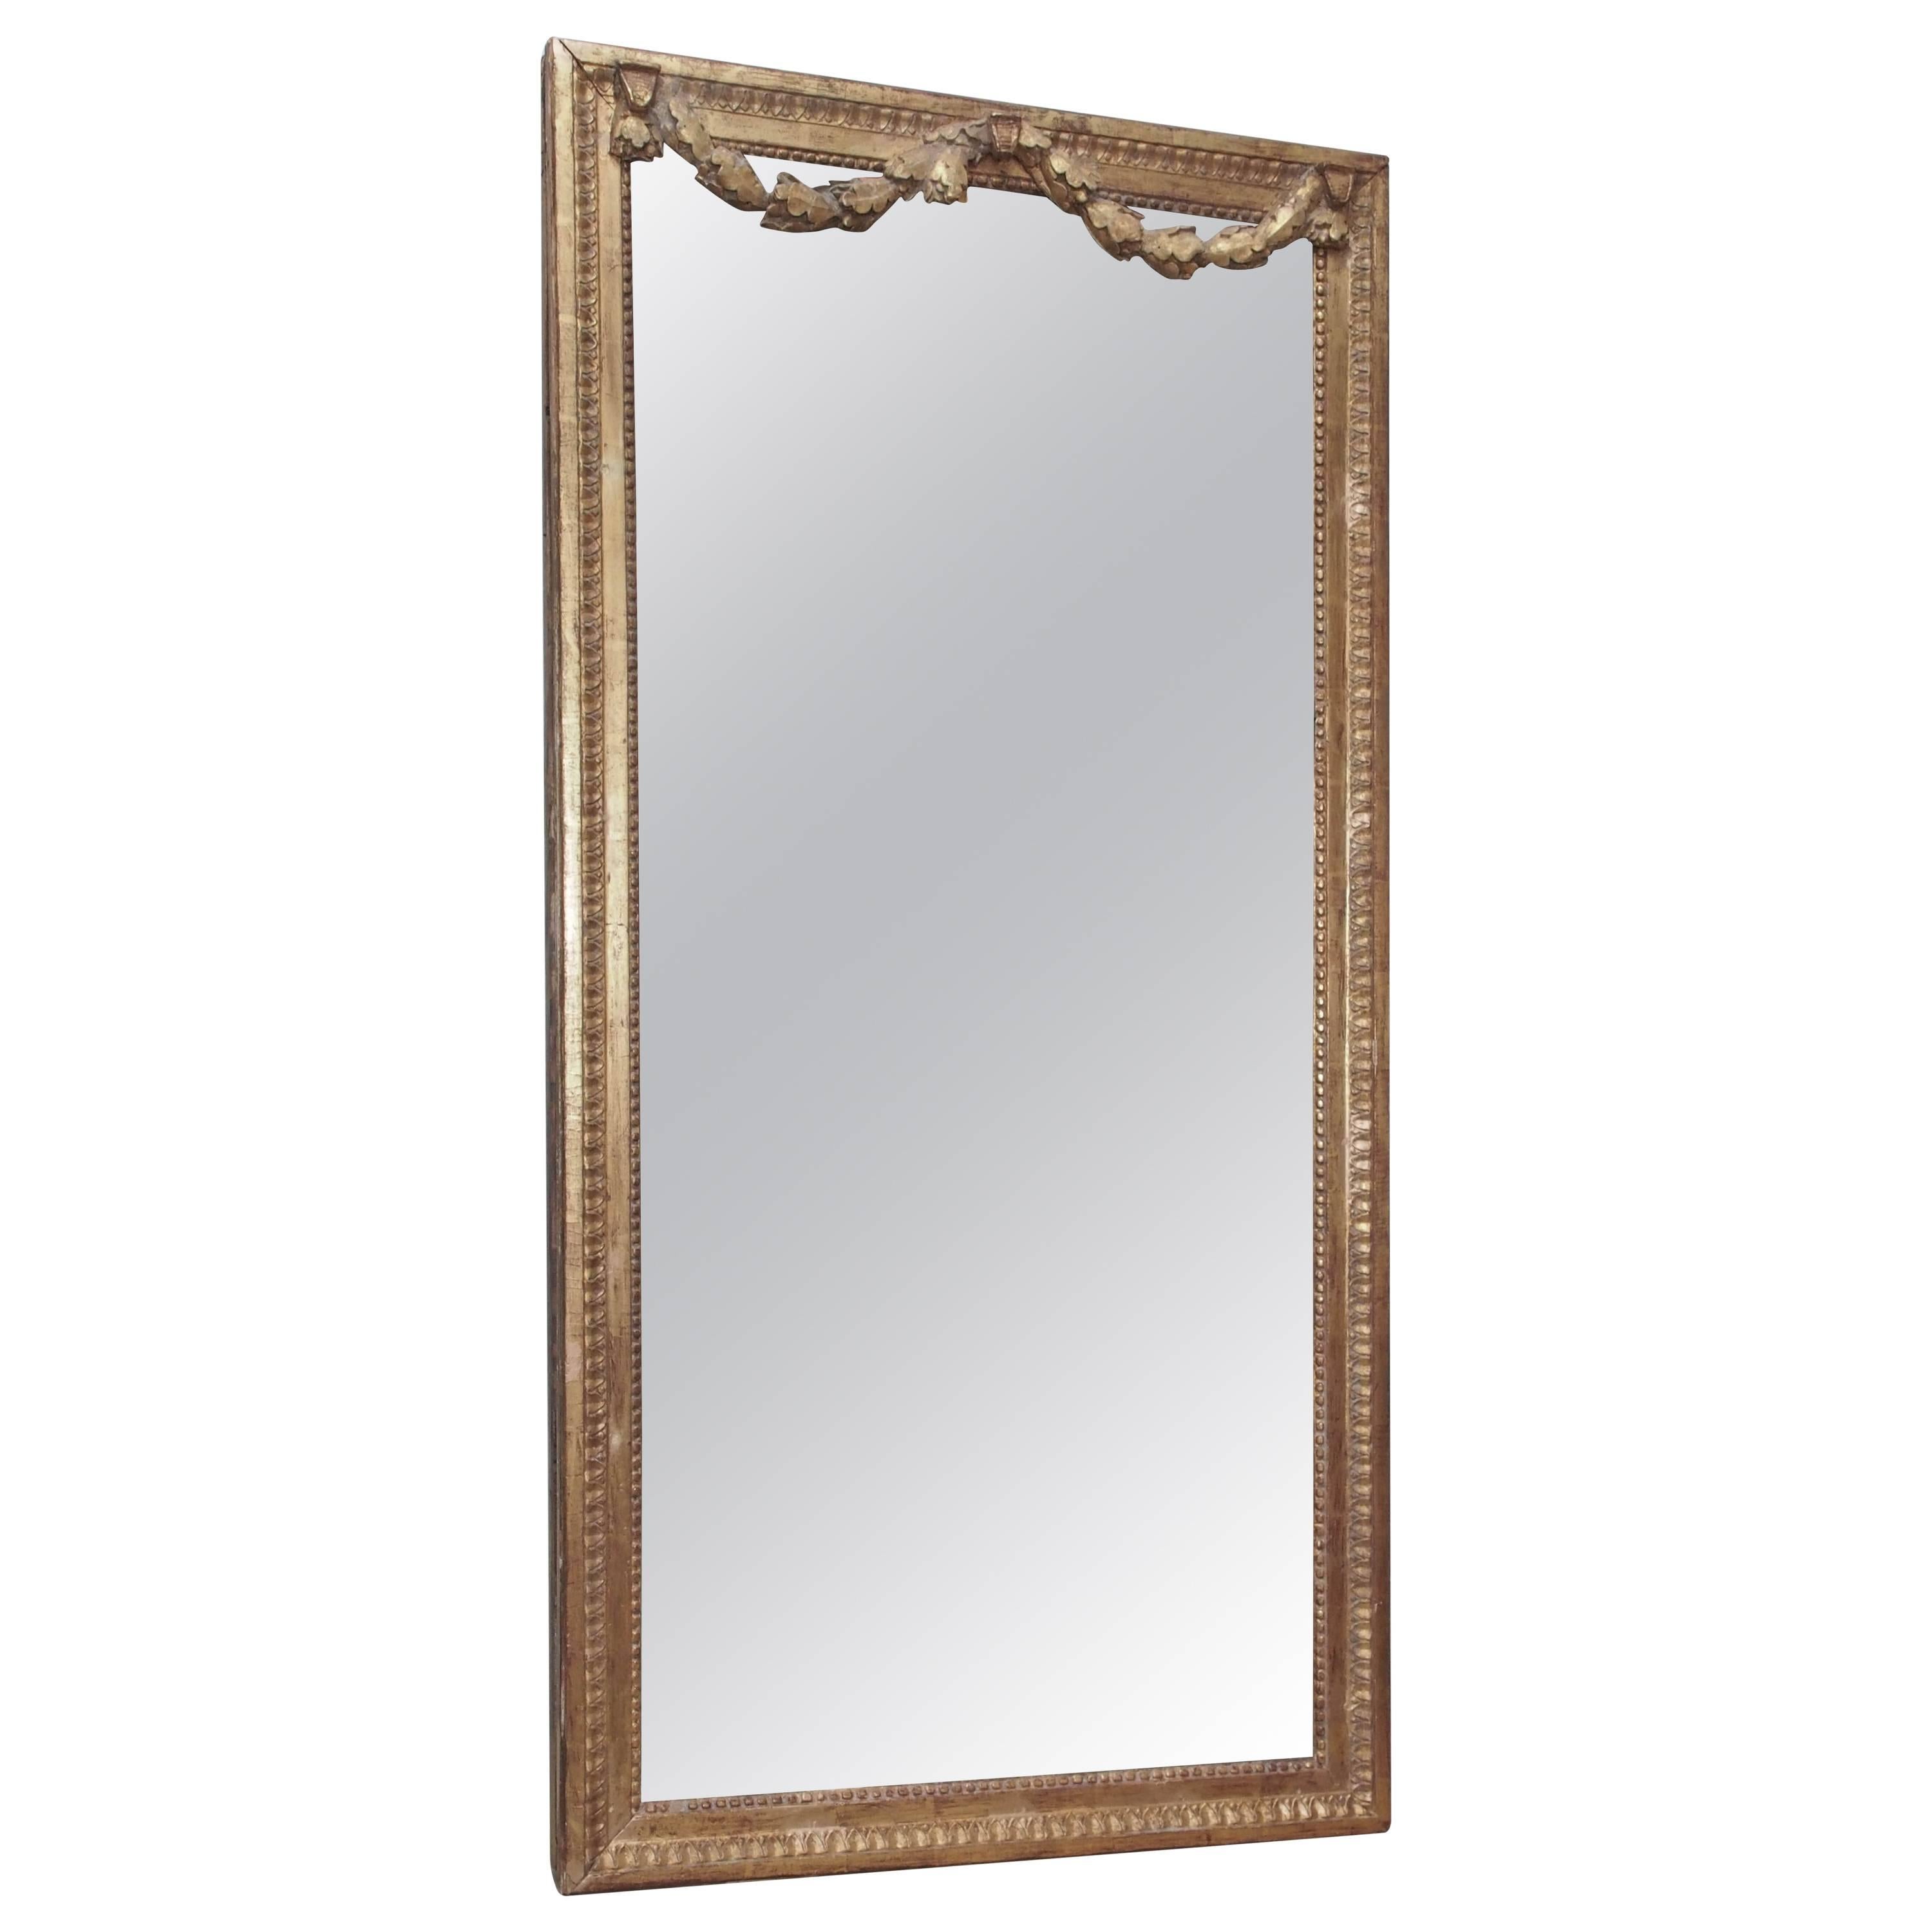 Giltwood Neoclassical Mirror with Garland Swags For Sale